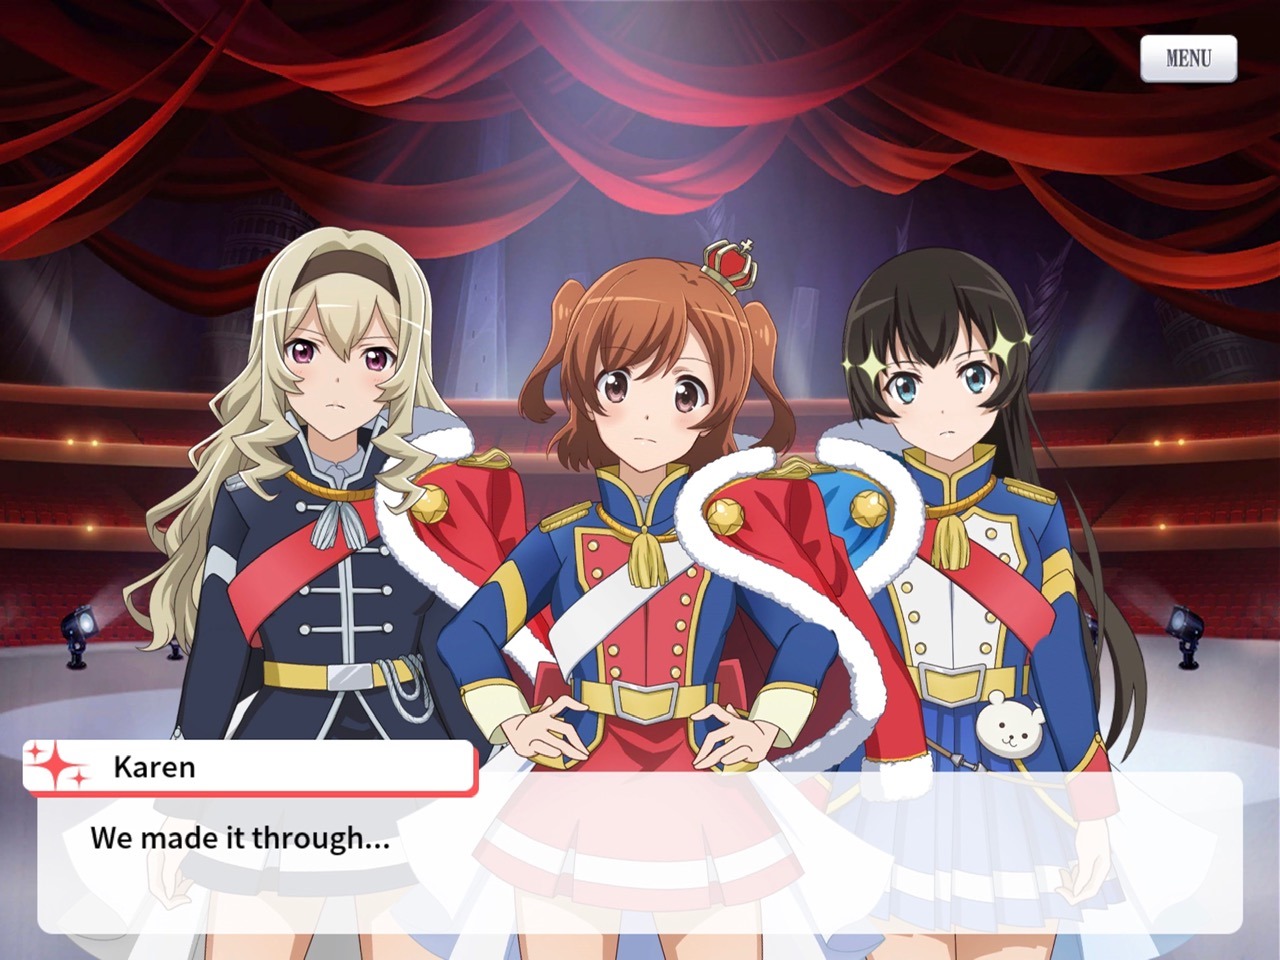 How To Get Started In Revue Starlight Re Live And Maintain A Steady Rhythm Siliconera